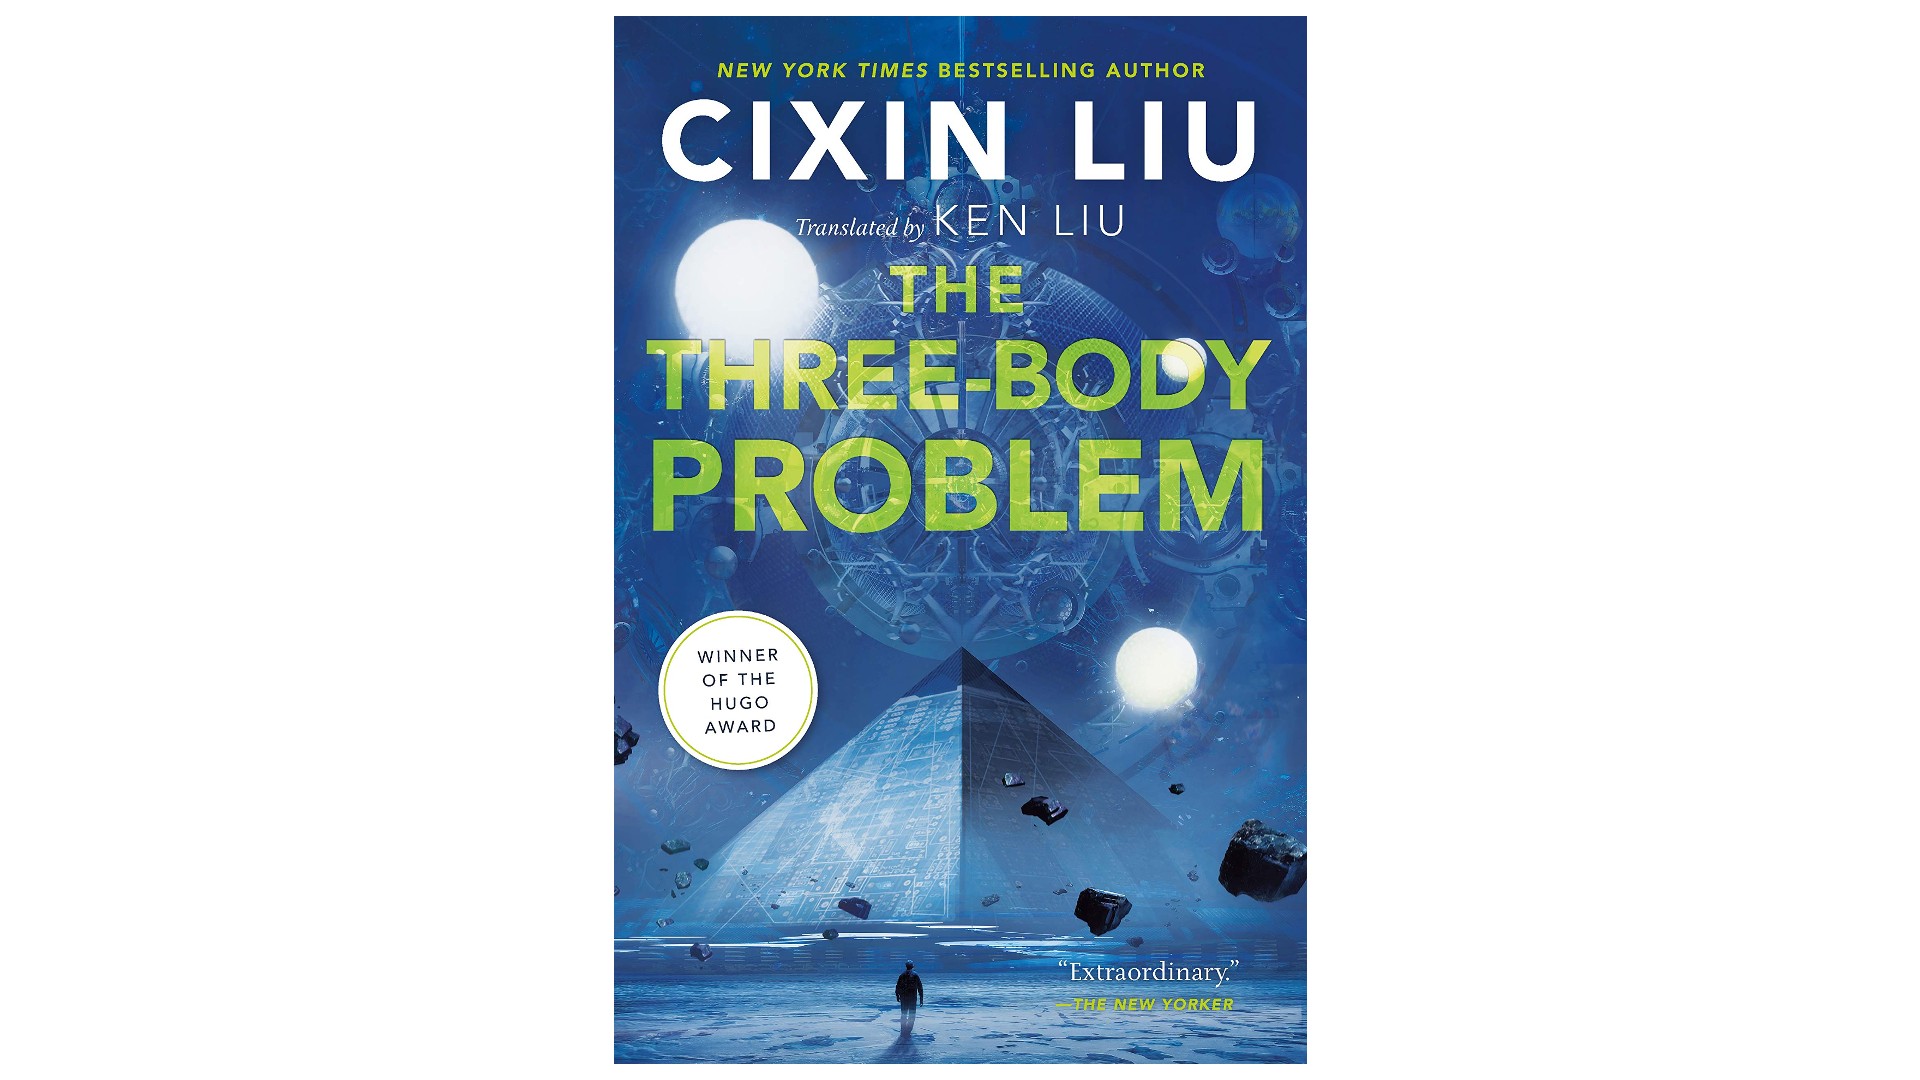 The Three-Body Problem by Cixin Liu (book cover)